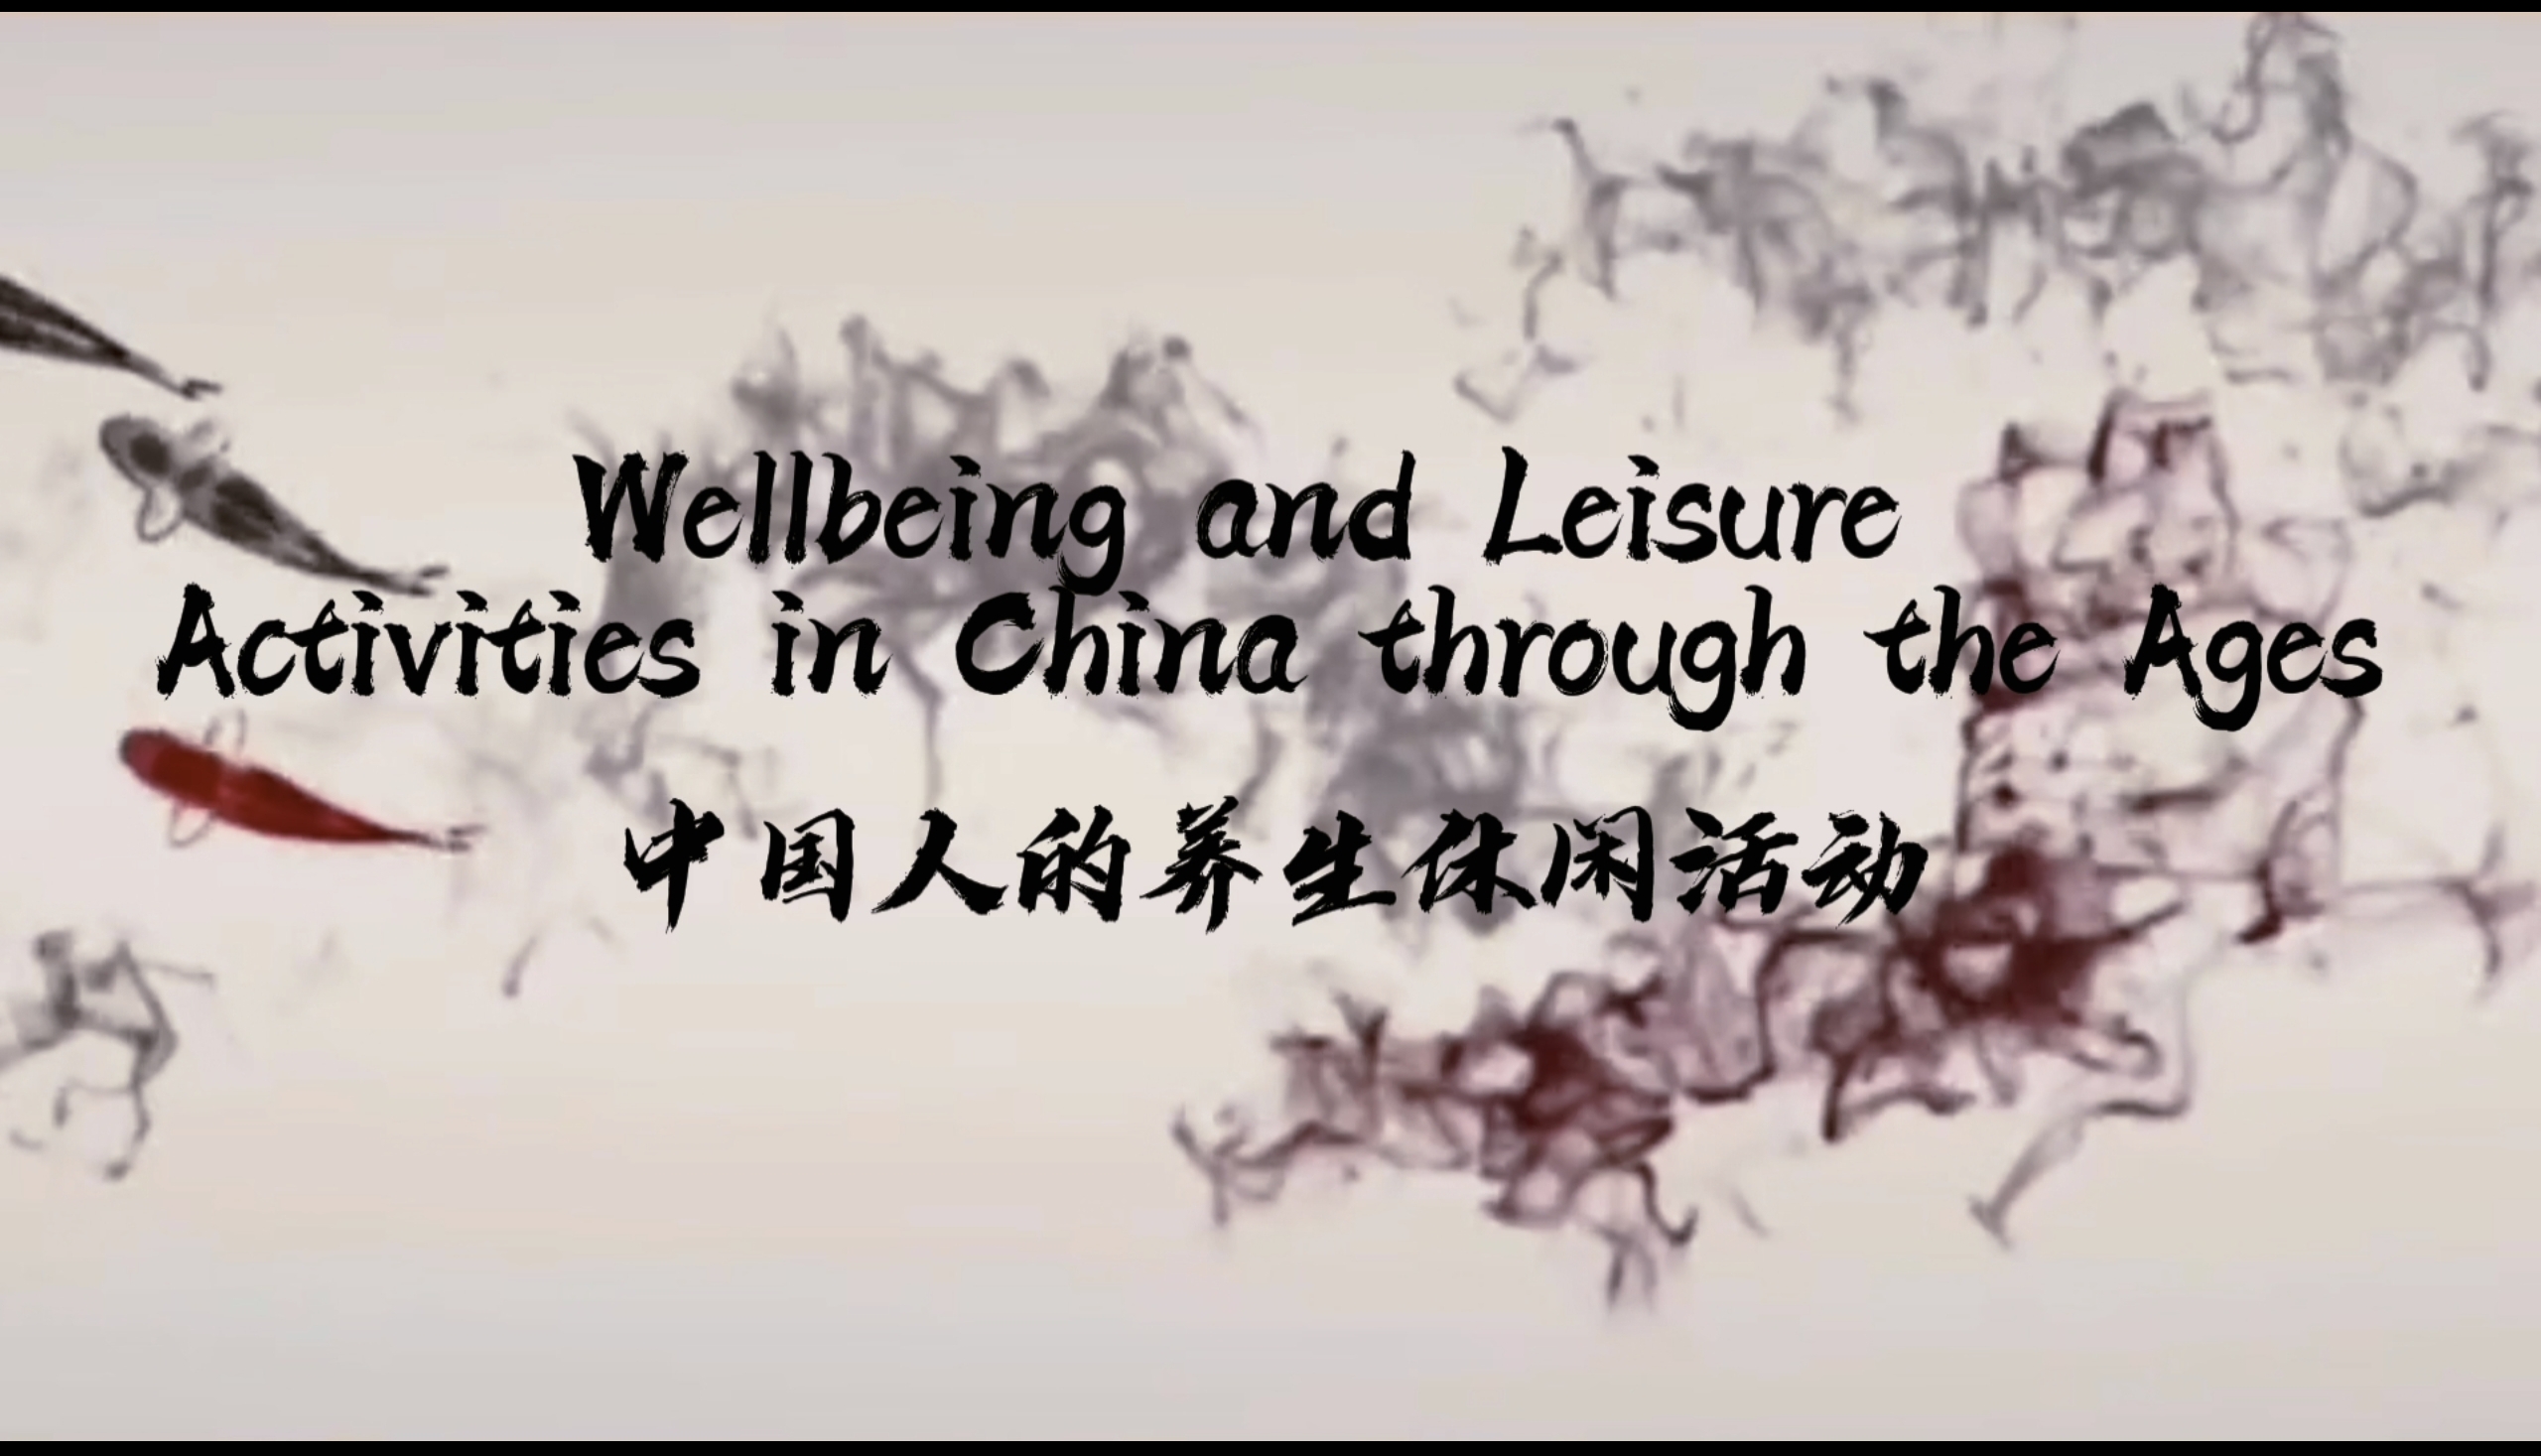 Wellbeing and Leisure in China through the Ages